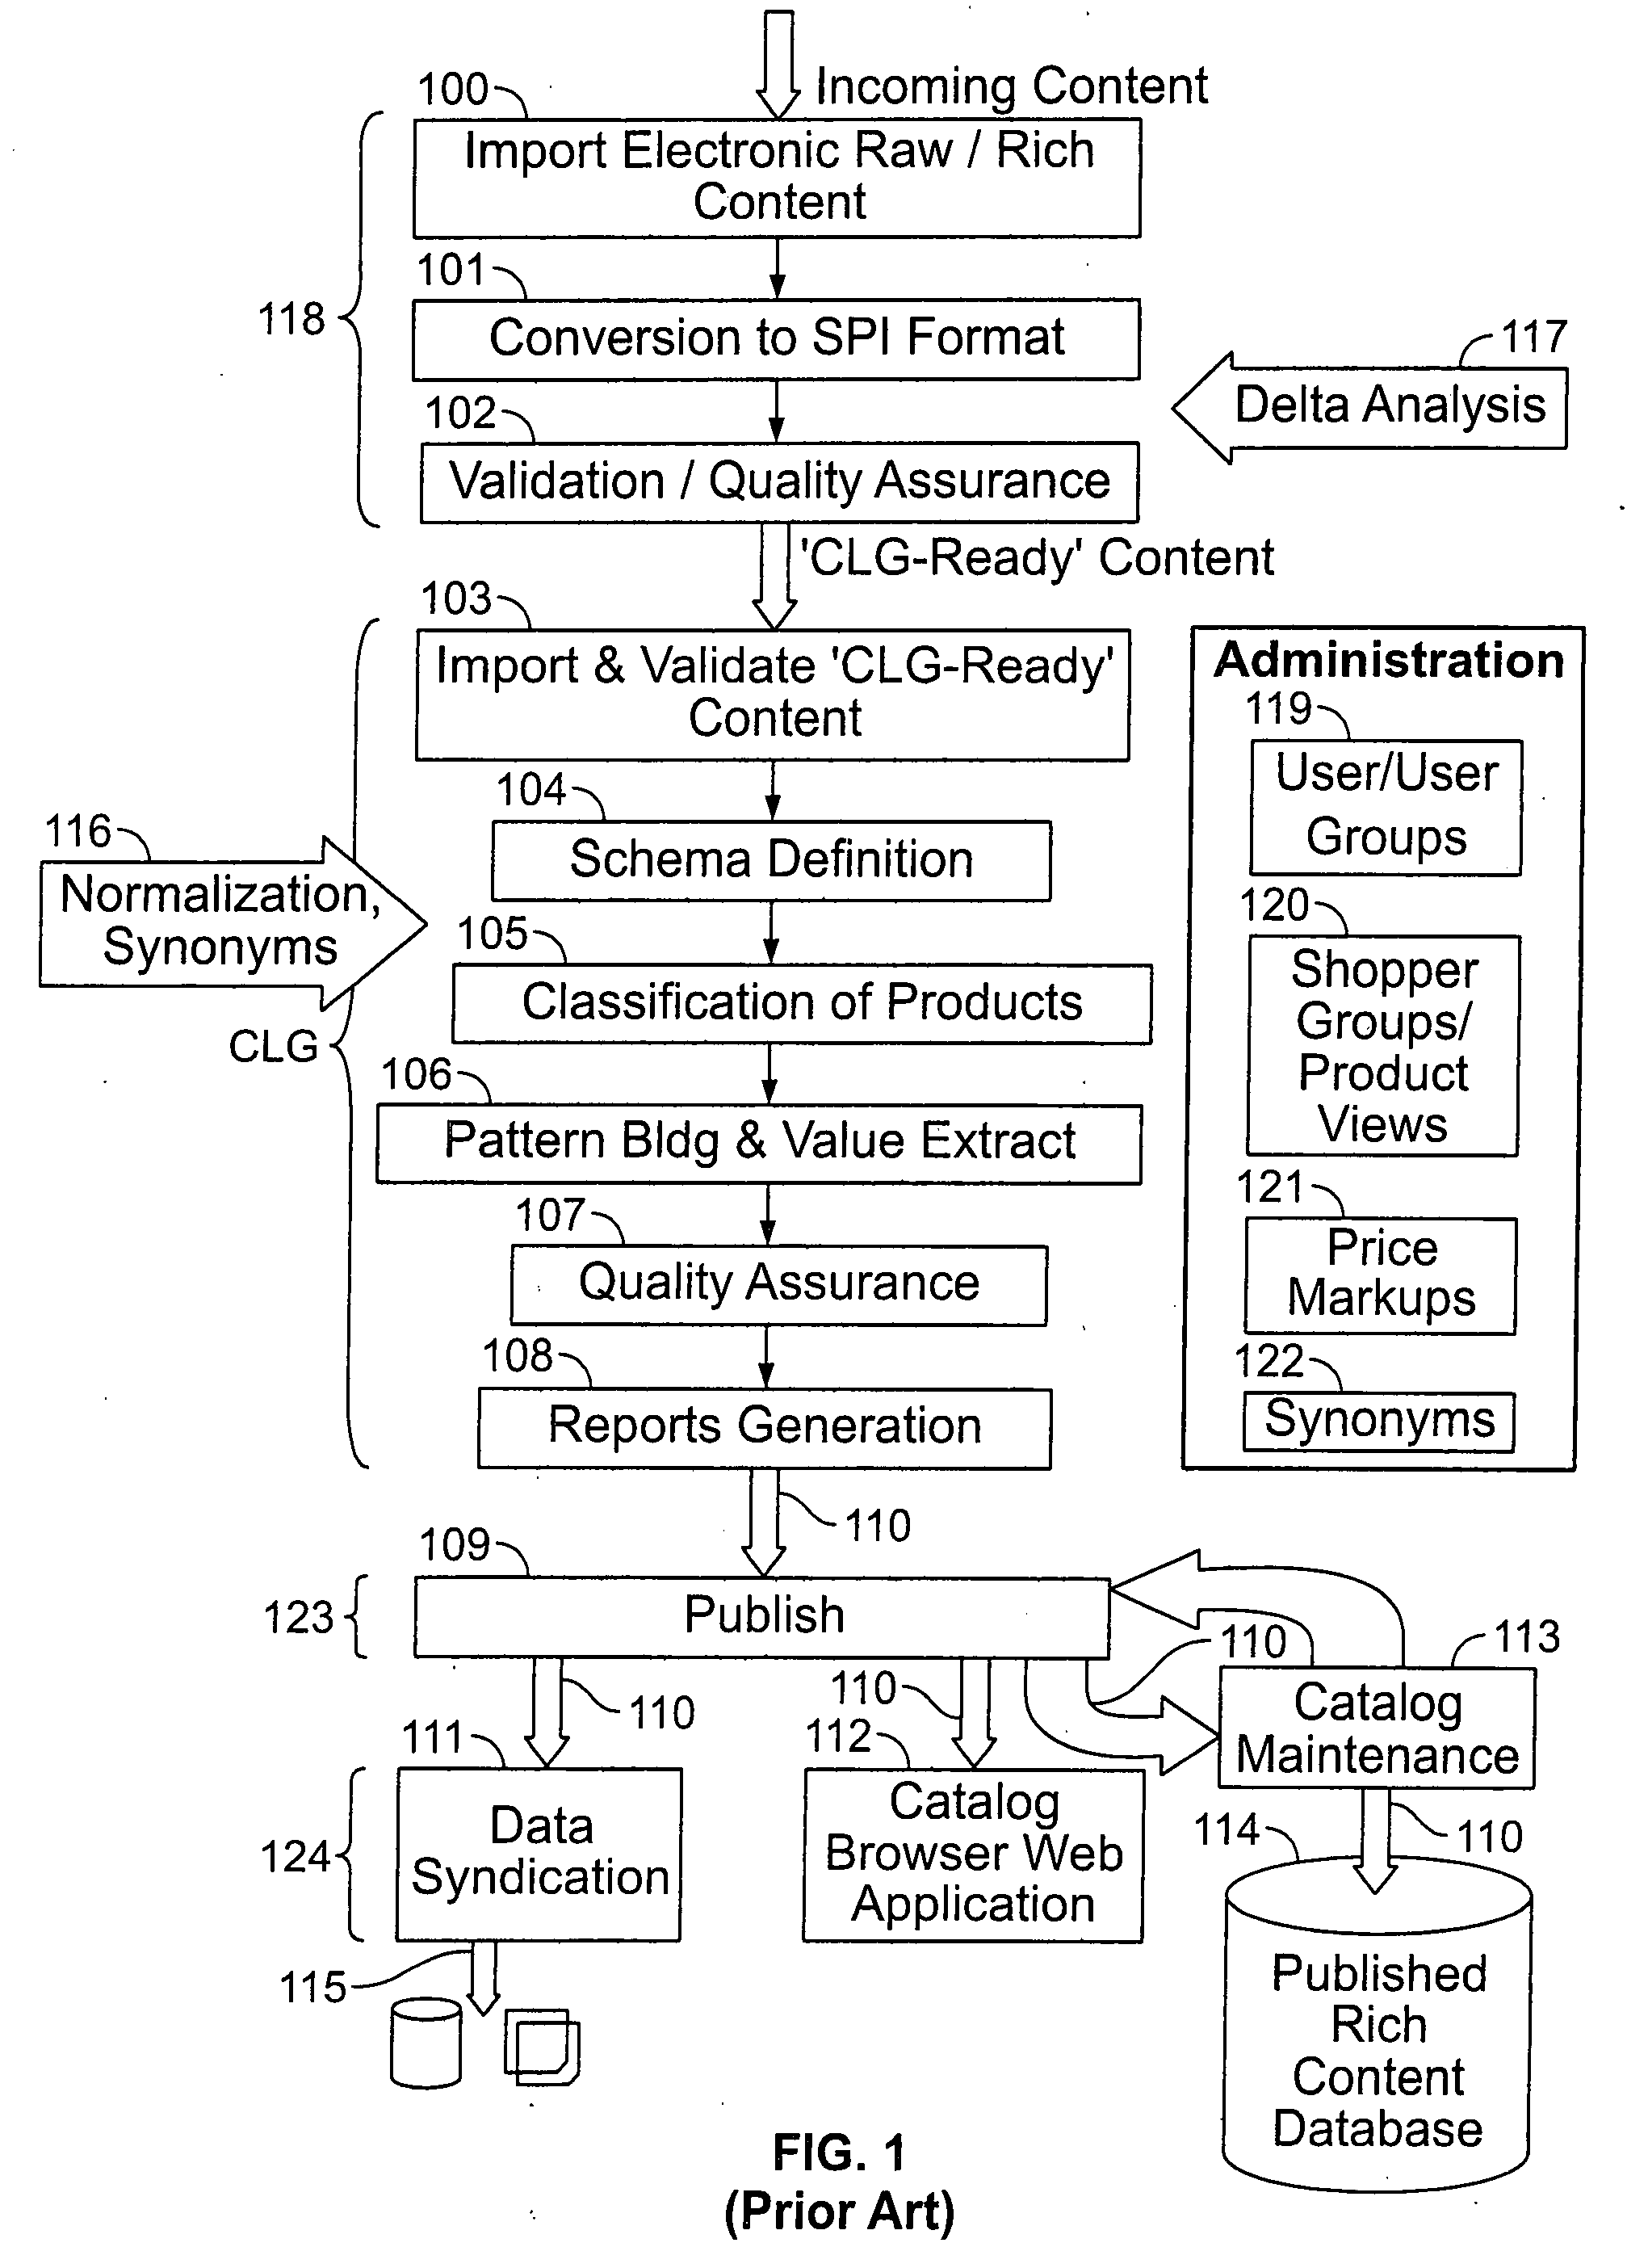 System and method for creation and maintenance of a rich content or content-centric electronic catalog